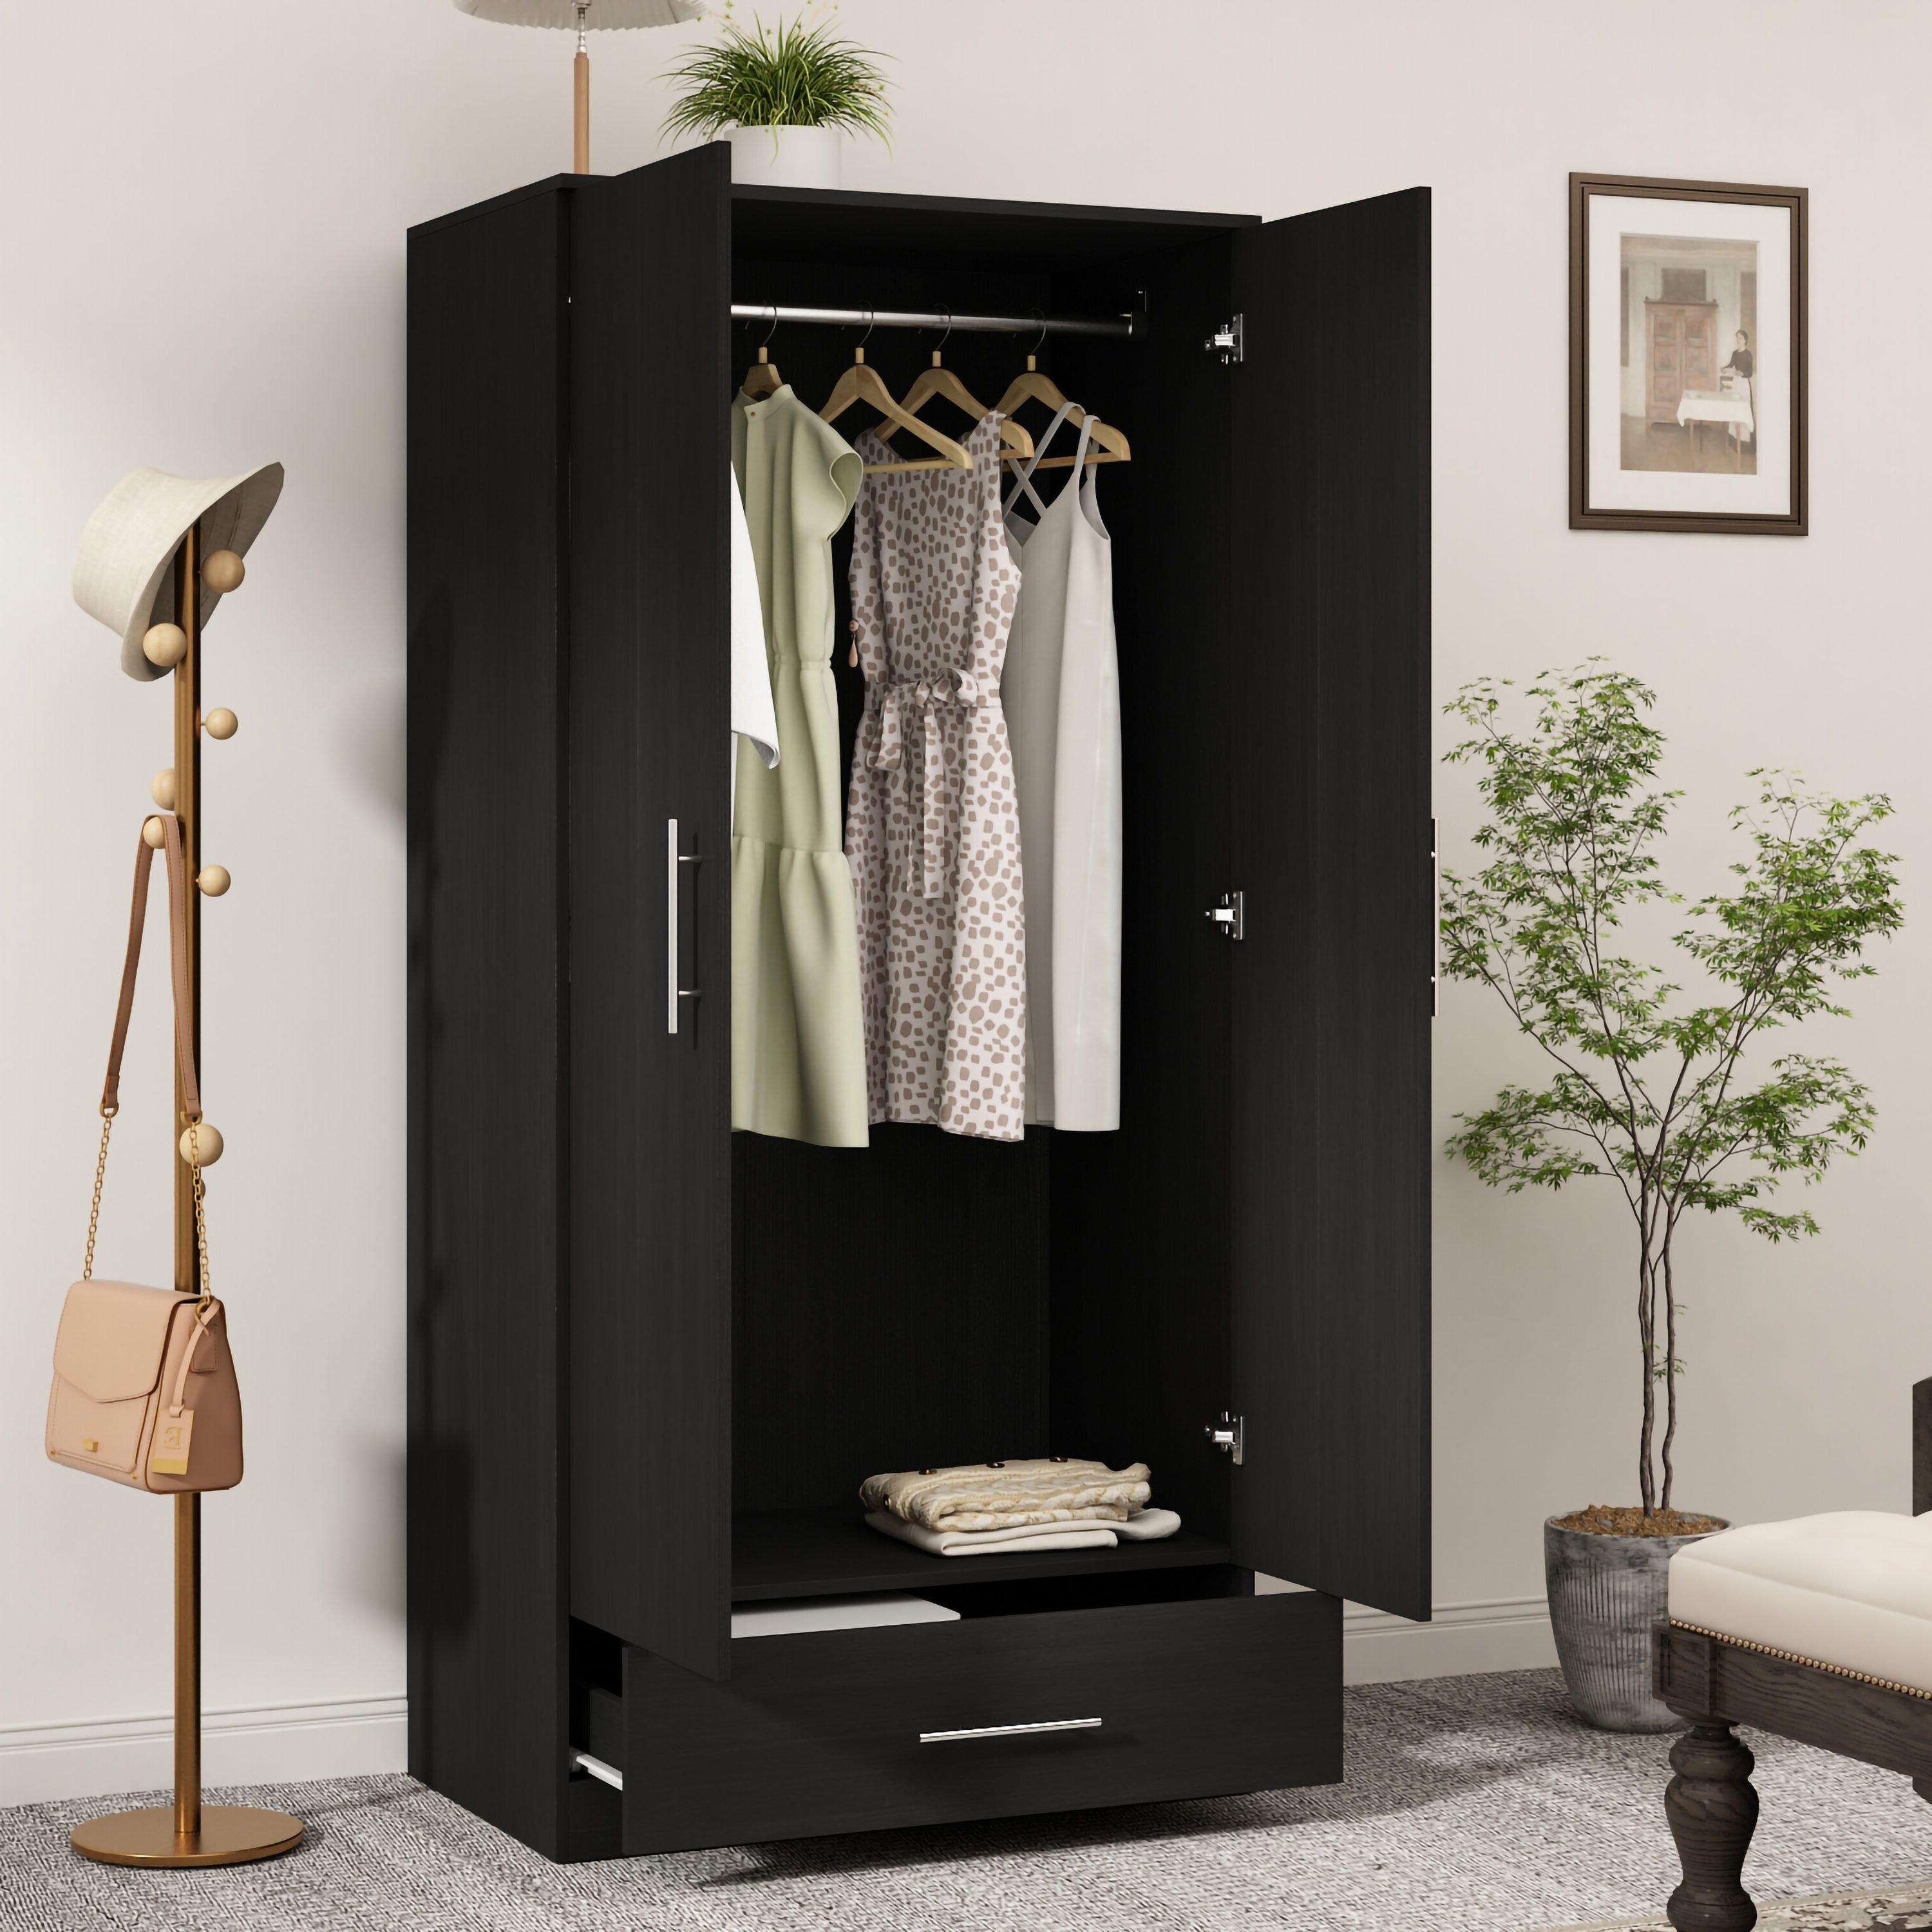 Fufu&gaga Black Armoire In The Armoires Department At Lowes With Black Single Door Wardrobes (View 17 of 20)